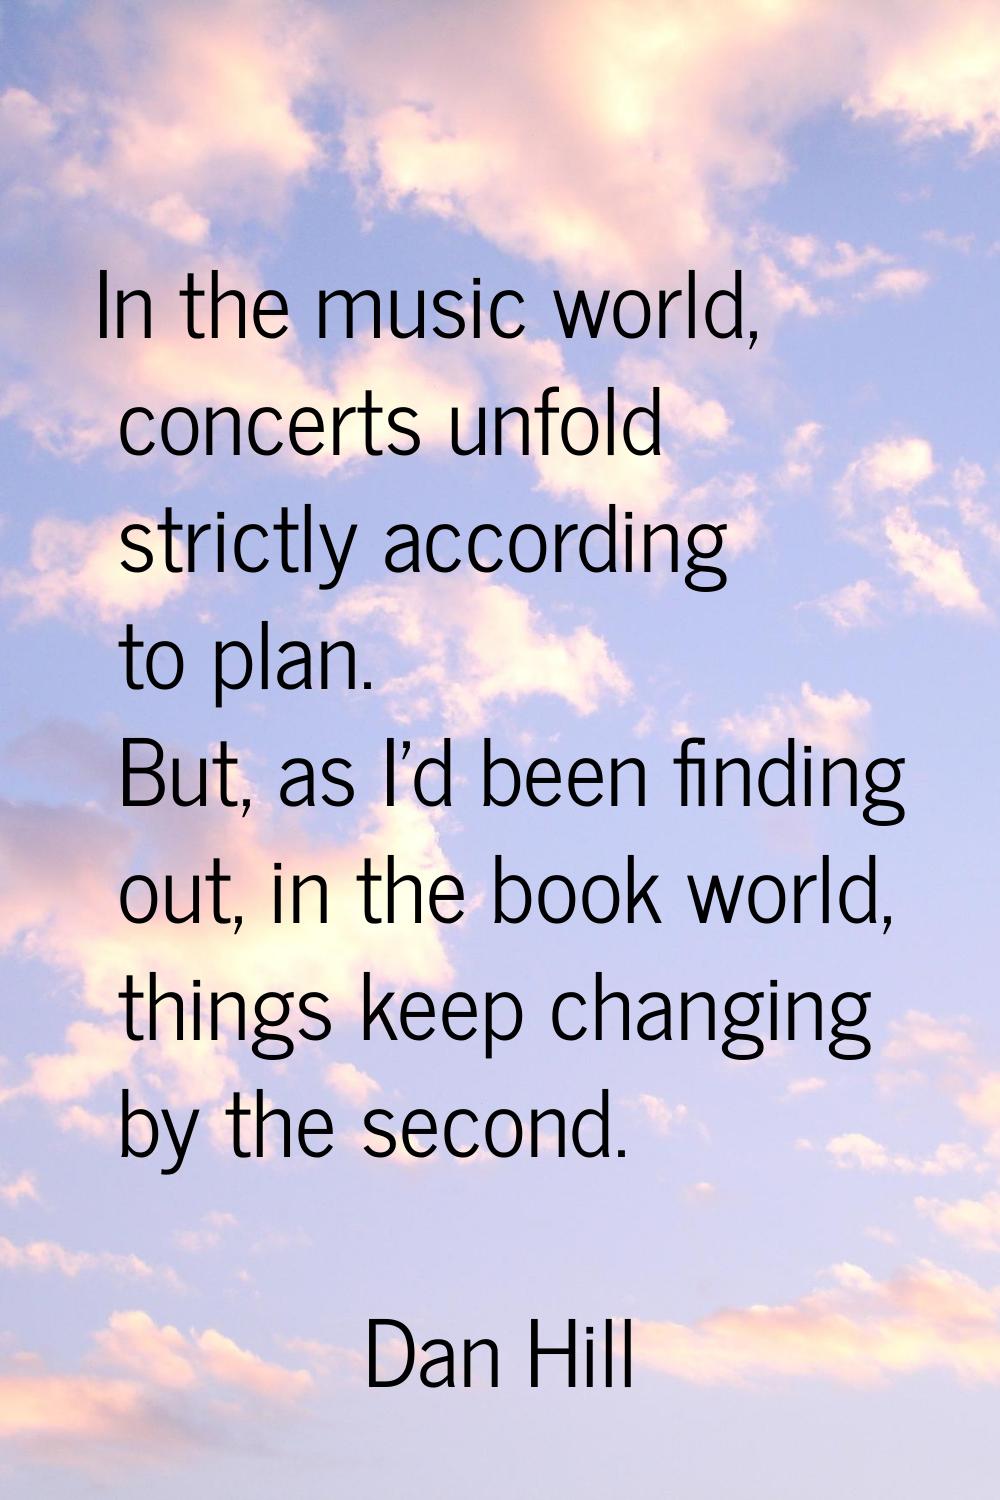 In the music world, concerts unfold strictly according to plan. But, as I'd been finding out, in th